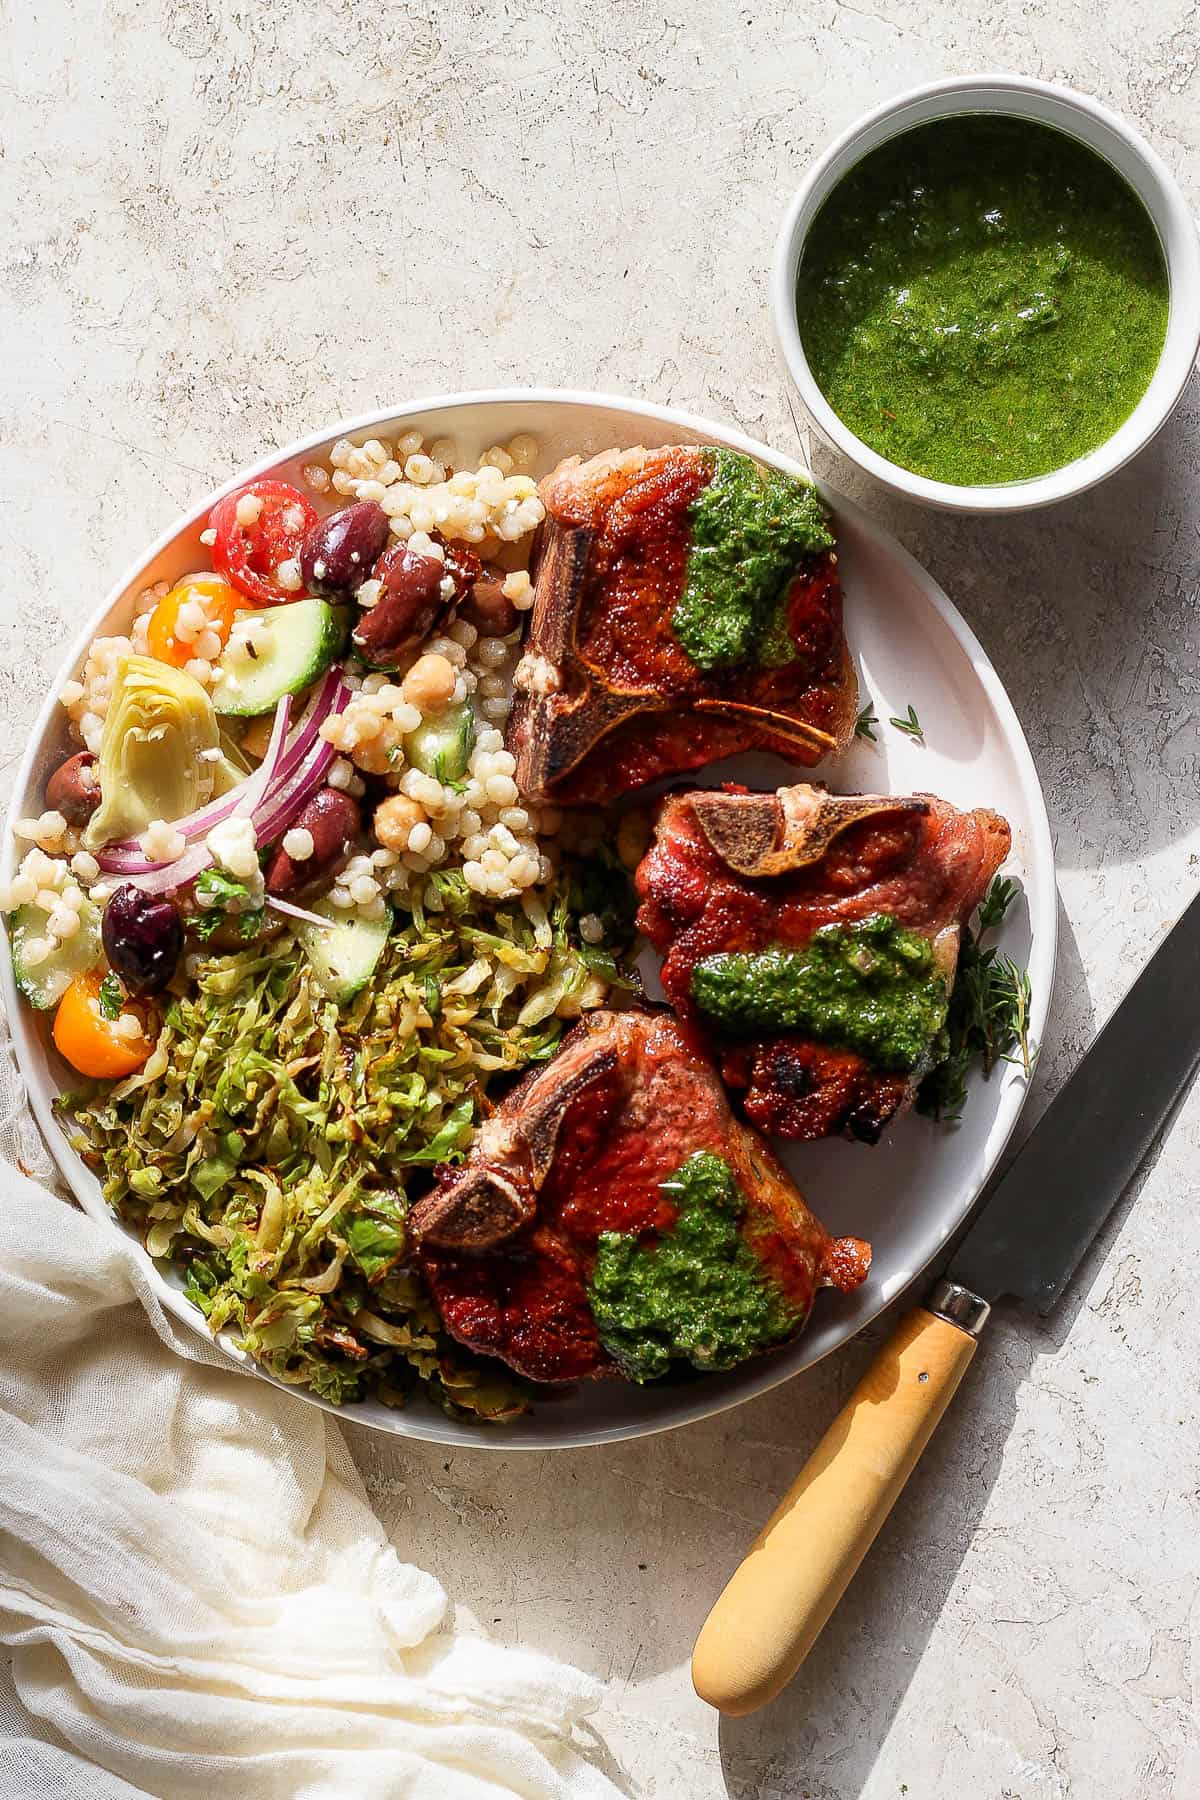 Lamb chops on a white plate with mint sauce on top and couscous salad and brussel sprouts on the side.